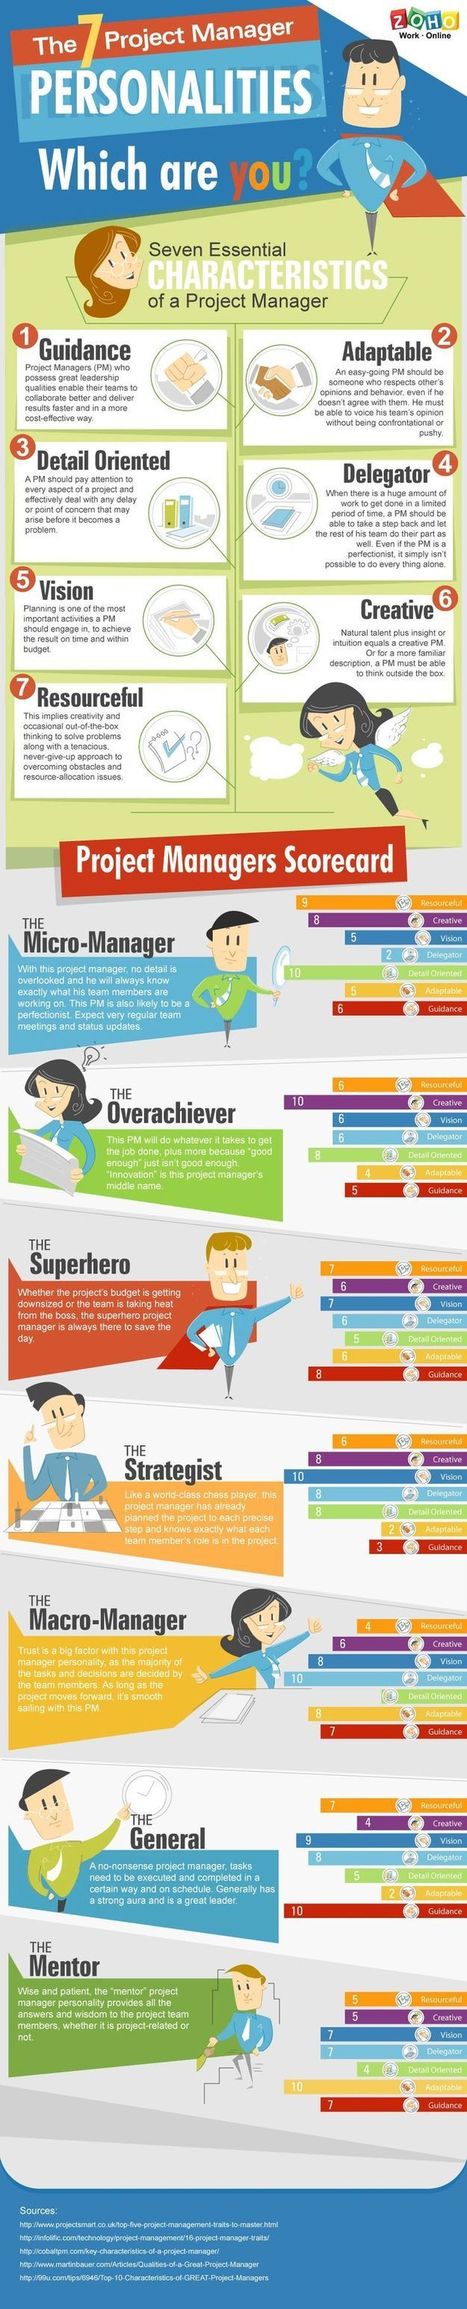 7 Project Manager Personalities-Which Are YOU? [Infographic] | Tidbits, titbits or tipbits? | Scoop.it